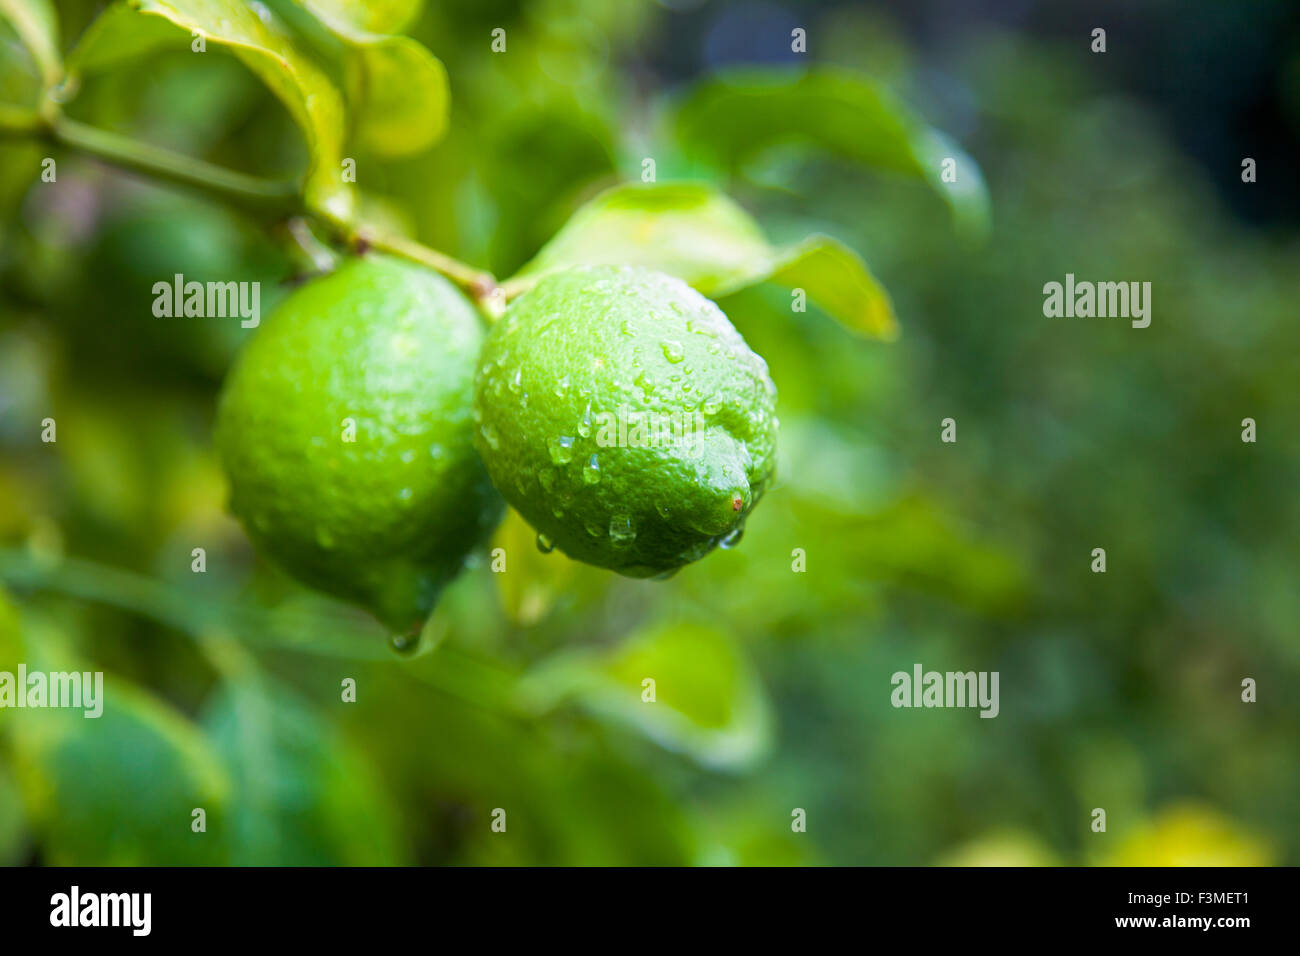 Fresh limes on a tree wet with raindrops Stock Photo